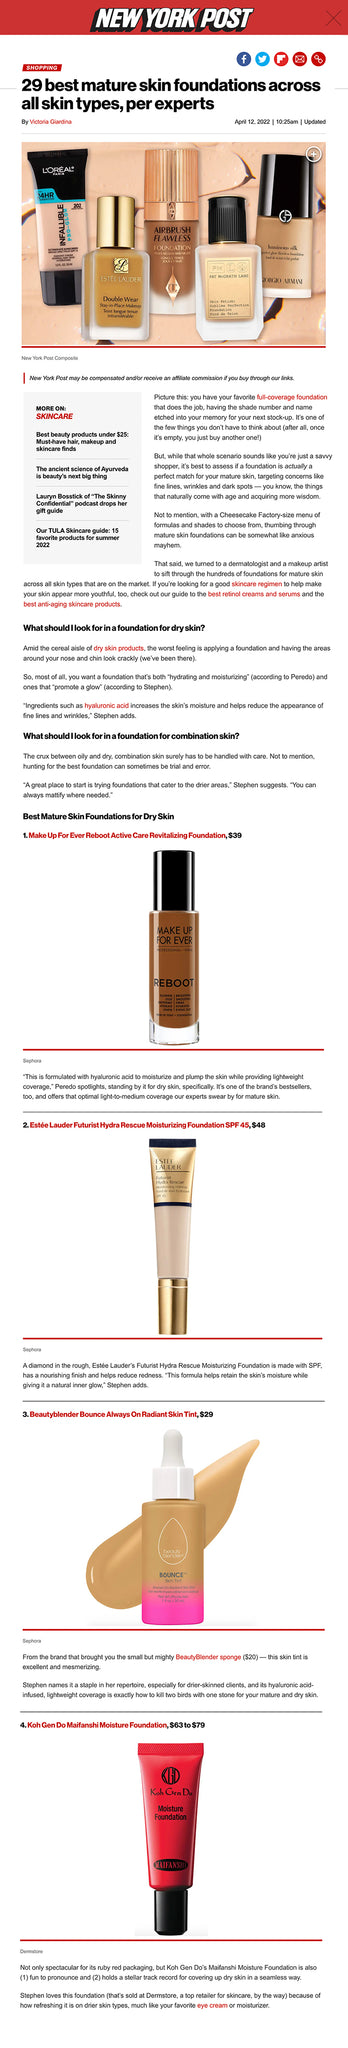 15 Best Drugstore Foundations (Reviews) For Mature Skin Over 50 – 2023  Update (With Buying Guide)